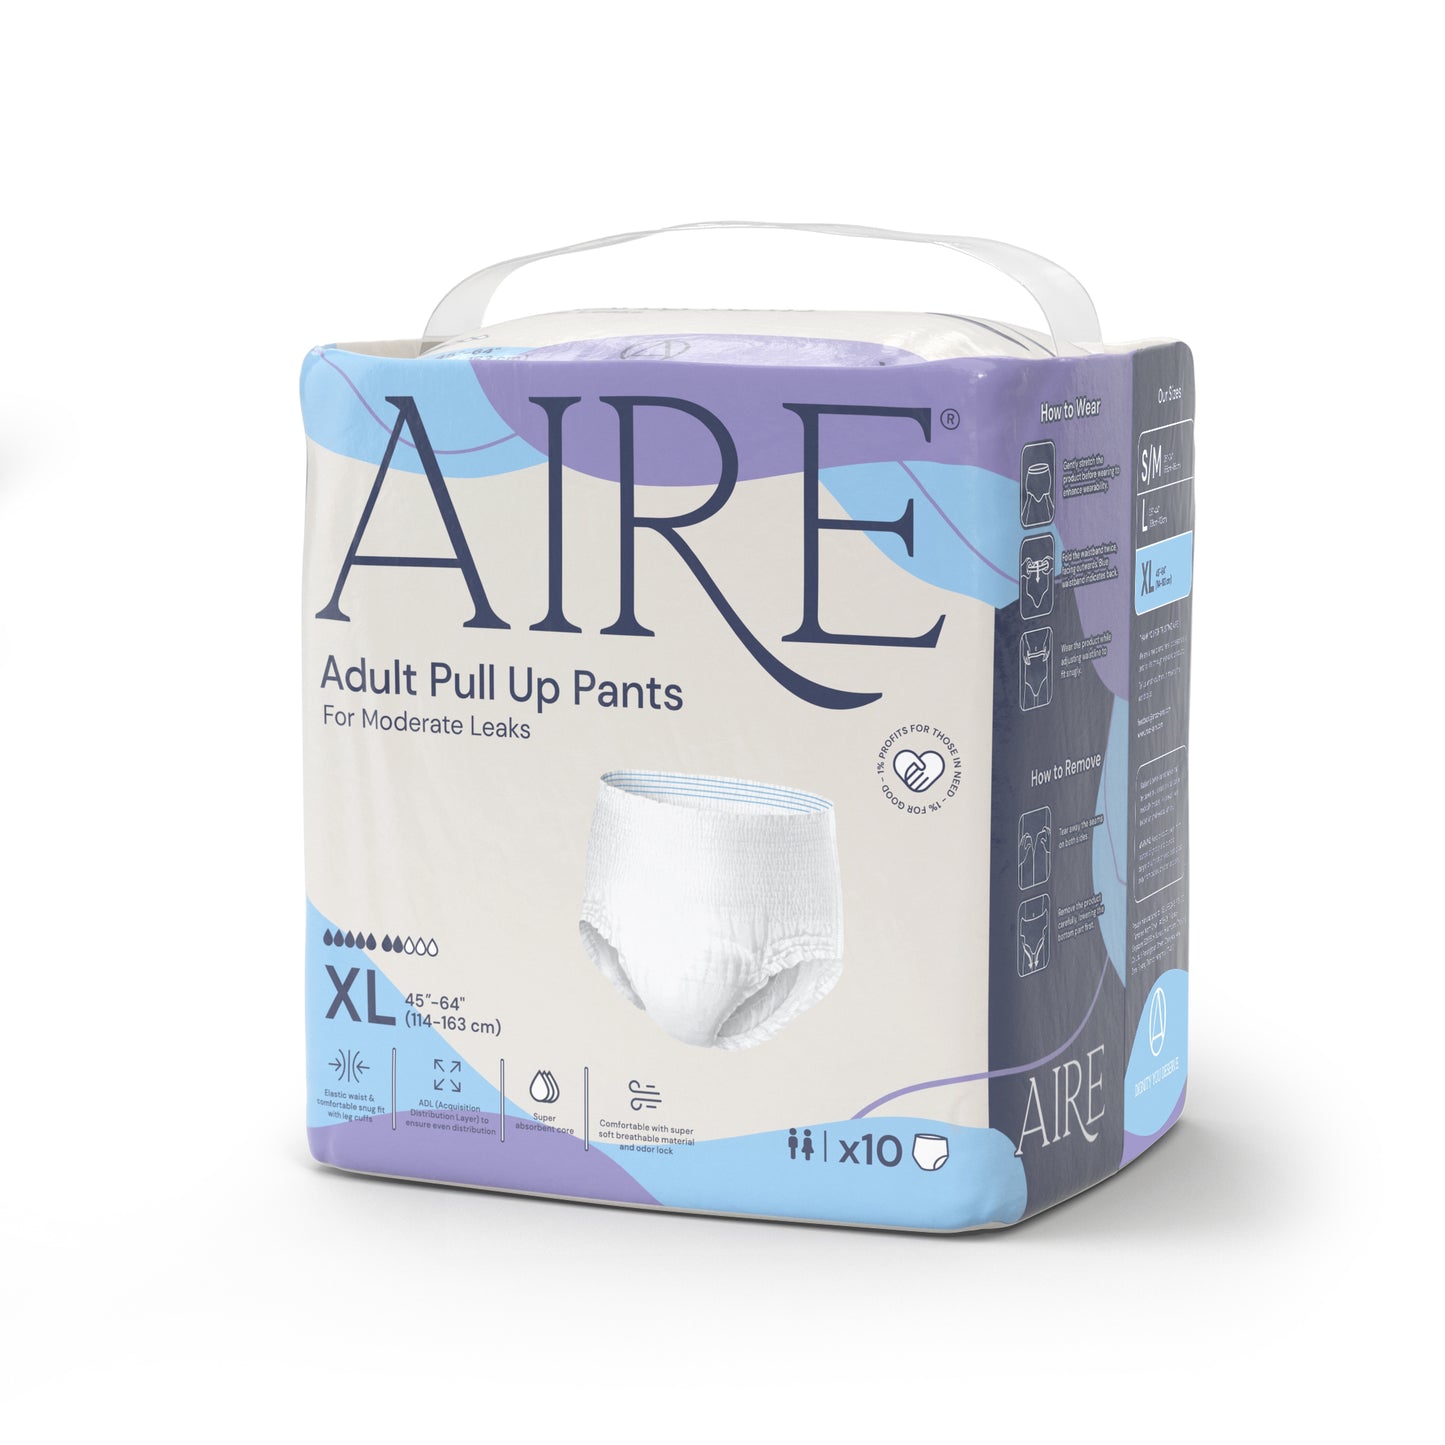 Aire Adult Pull Up Pants XL